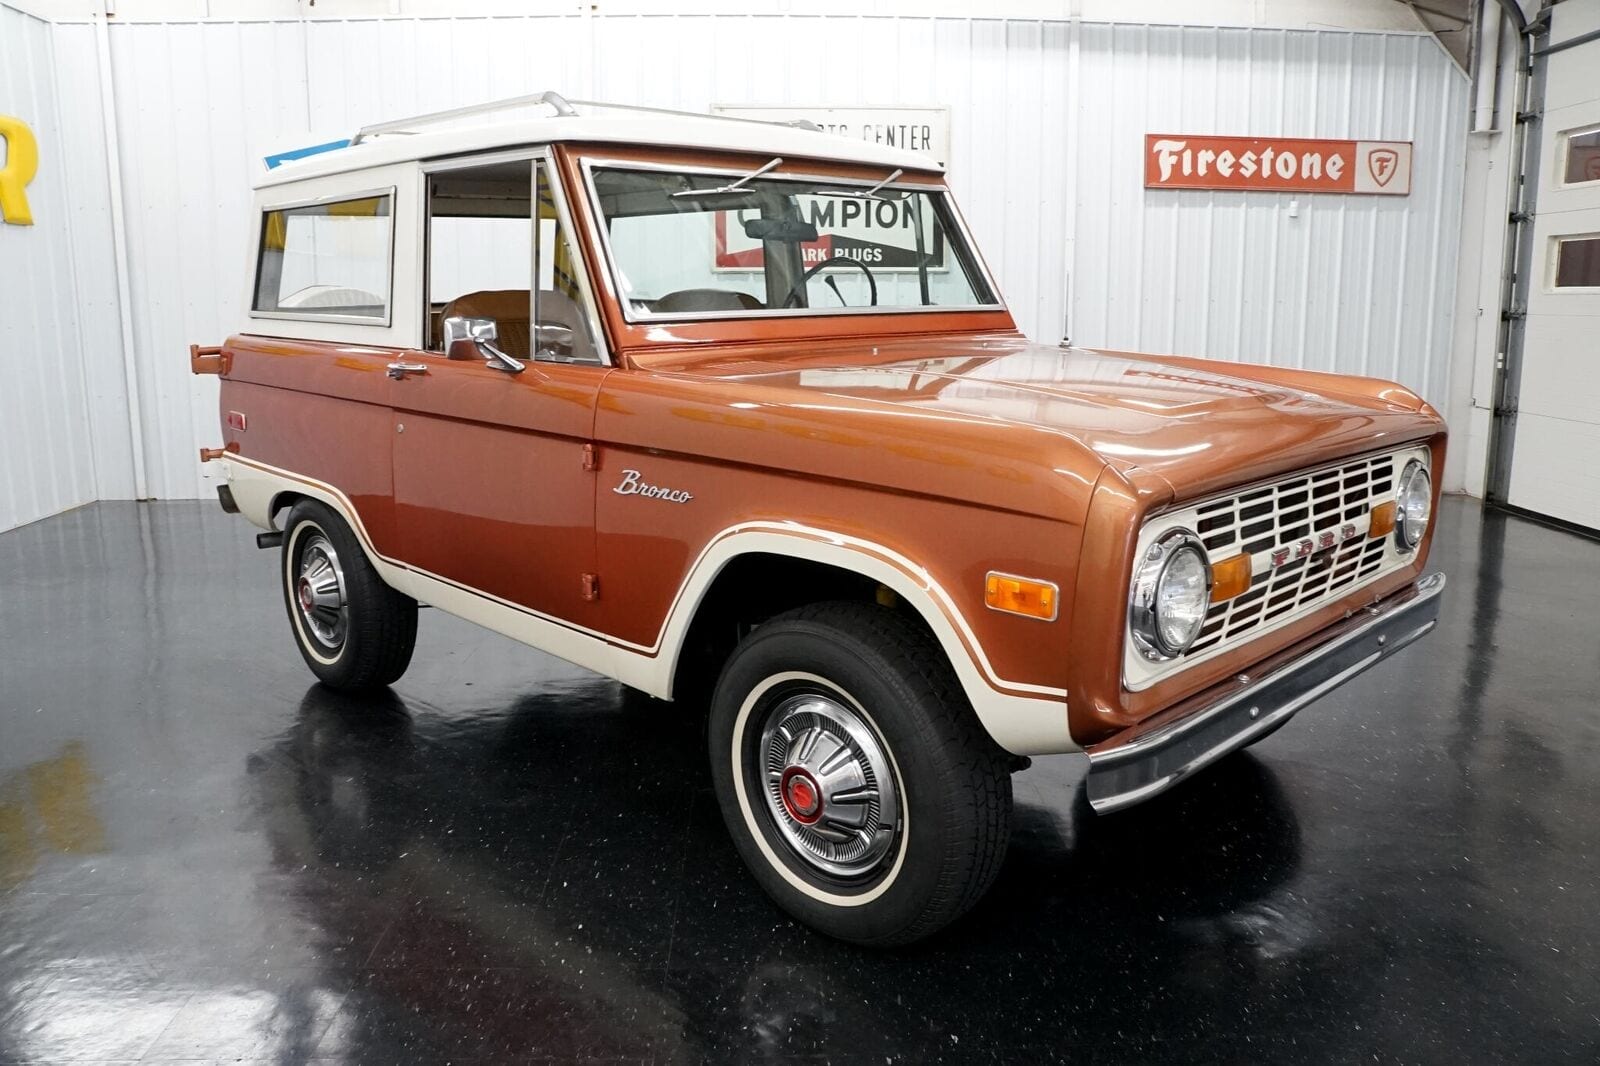 Hot Ginger 1974 Ford Bronco sitting in a garage